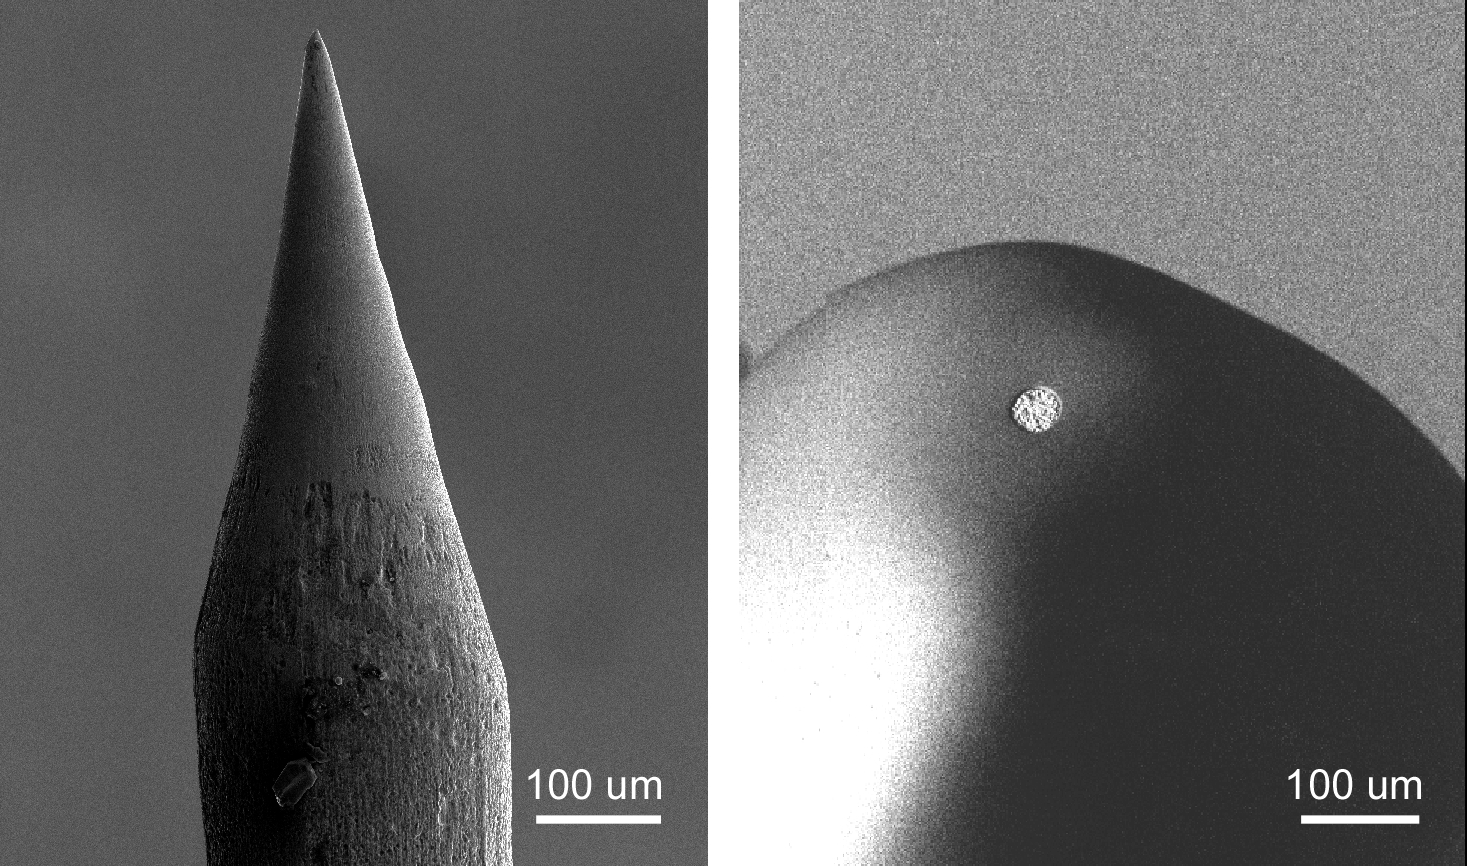 SEM images of Left) Gold nanoneedle electrode, Right) Glass-recessed micro silver electrode